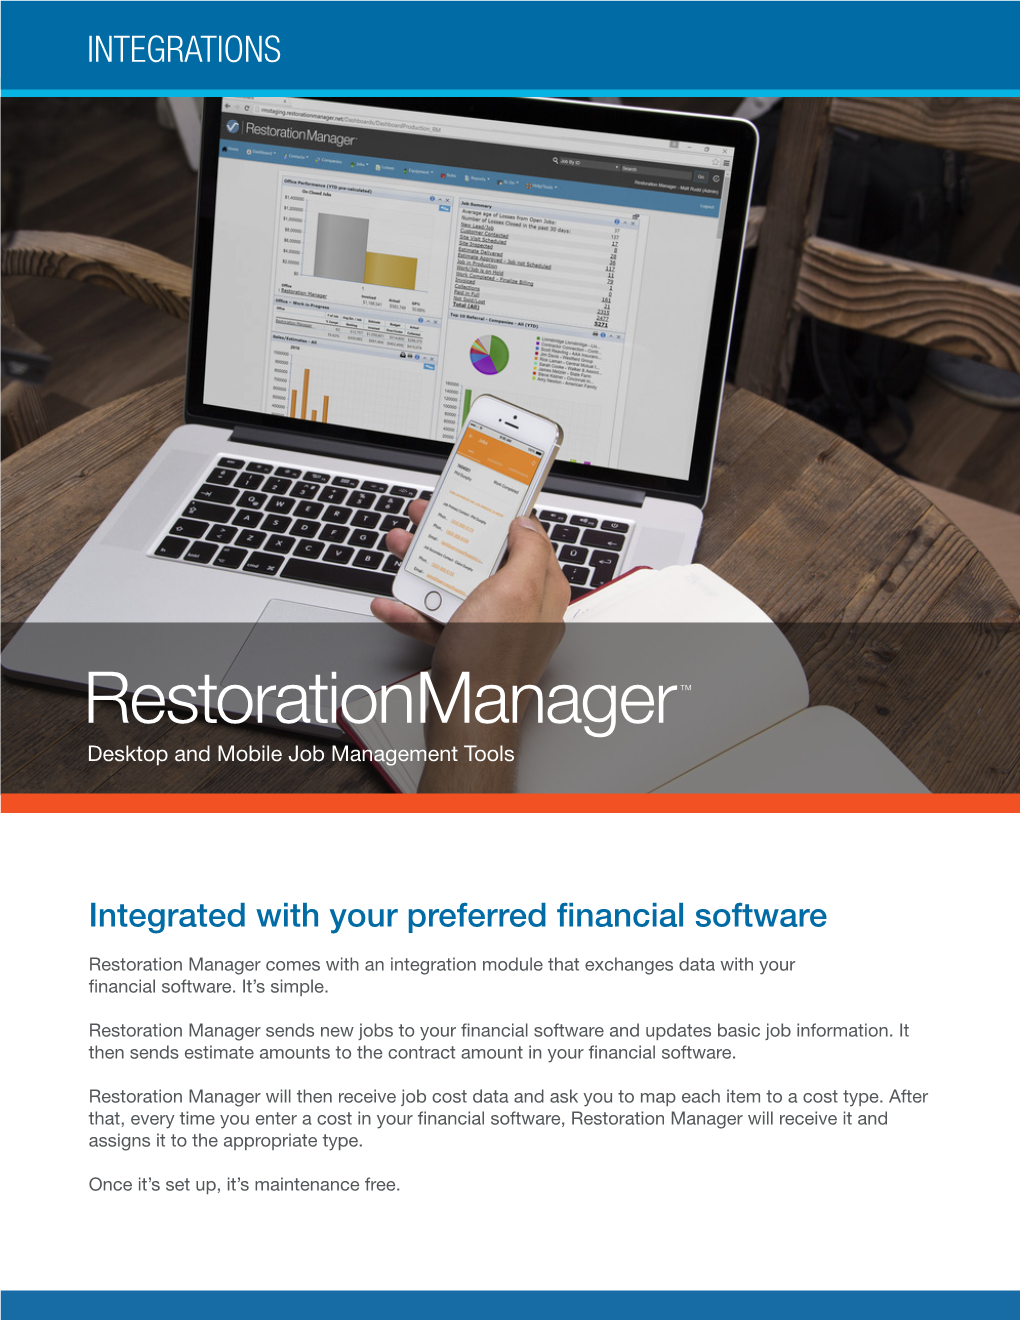 Restoration Manager Comes with an Integration Module That Exchanges Data with Your Financial Software